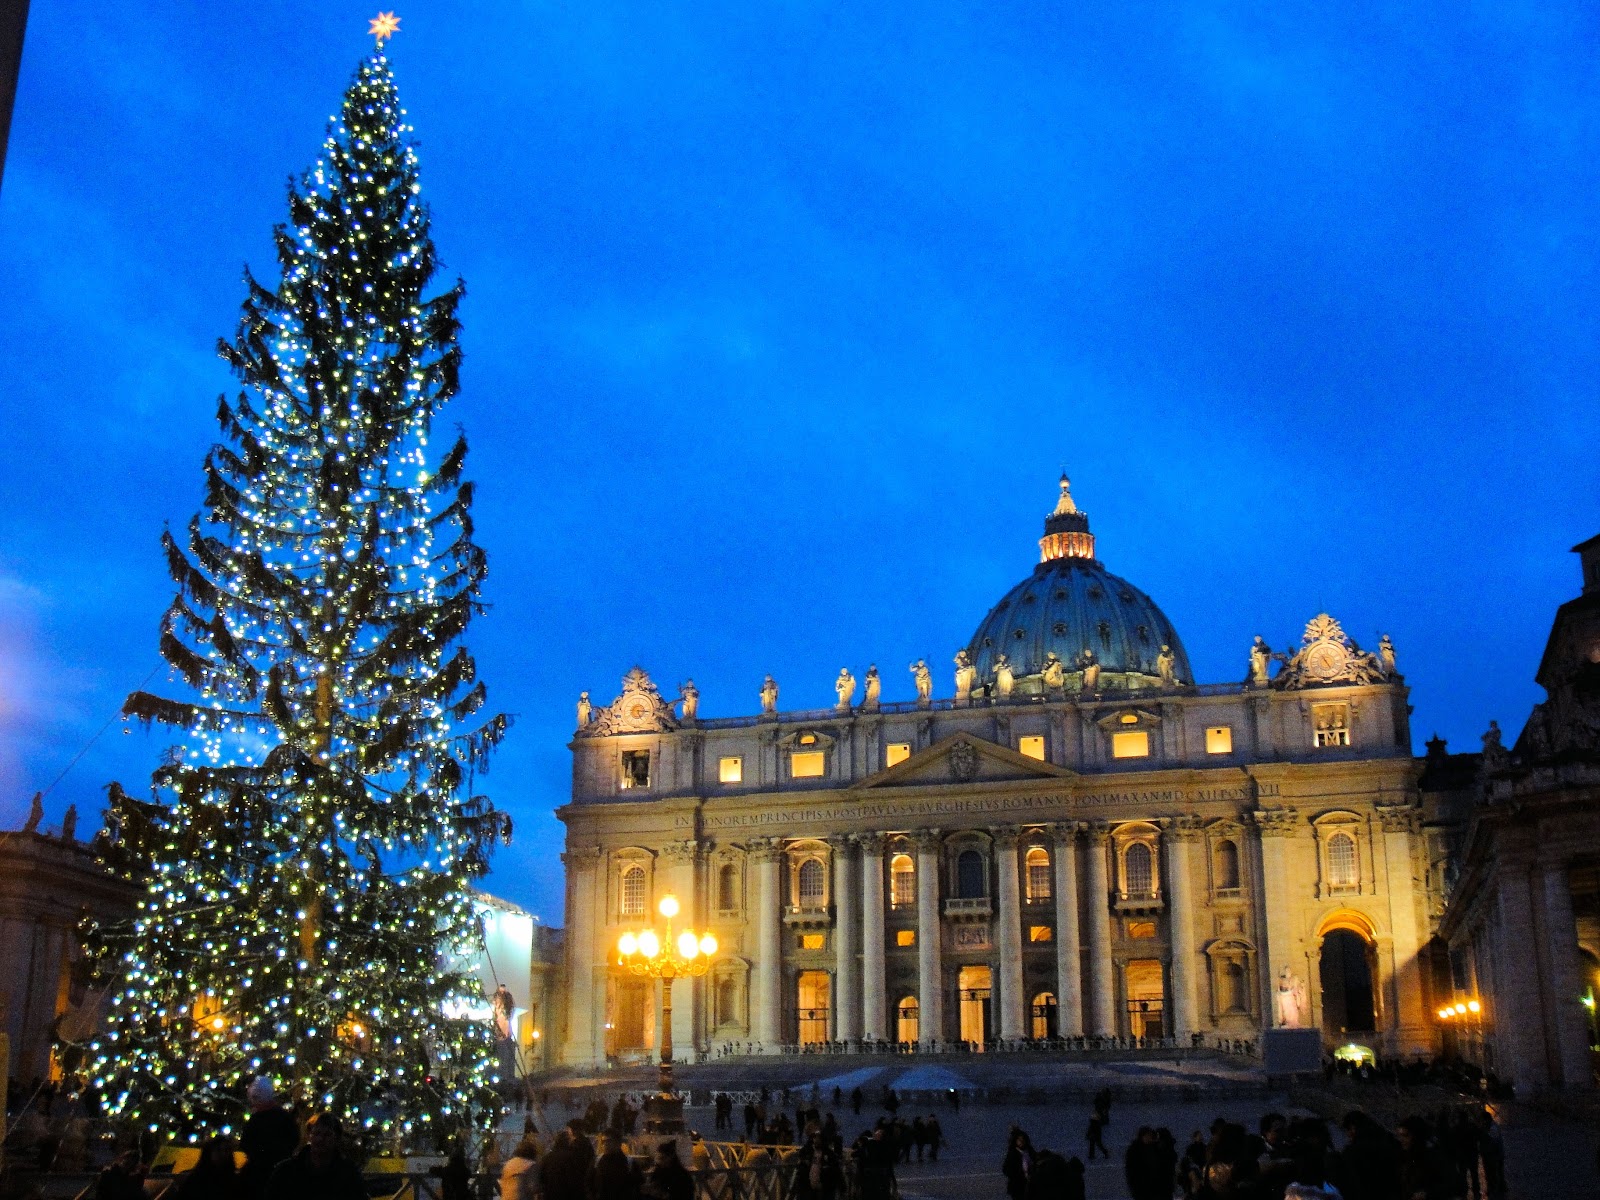 Buon Natale What Does It Mean.In Search Of Christmas Celebrating Italian Christmas Traditions